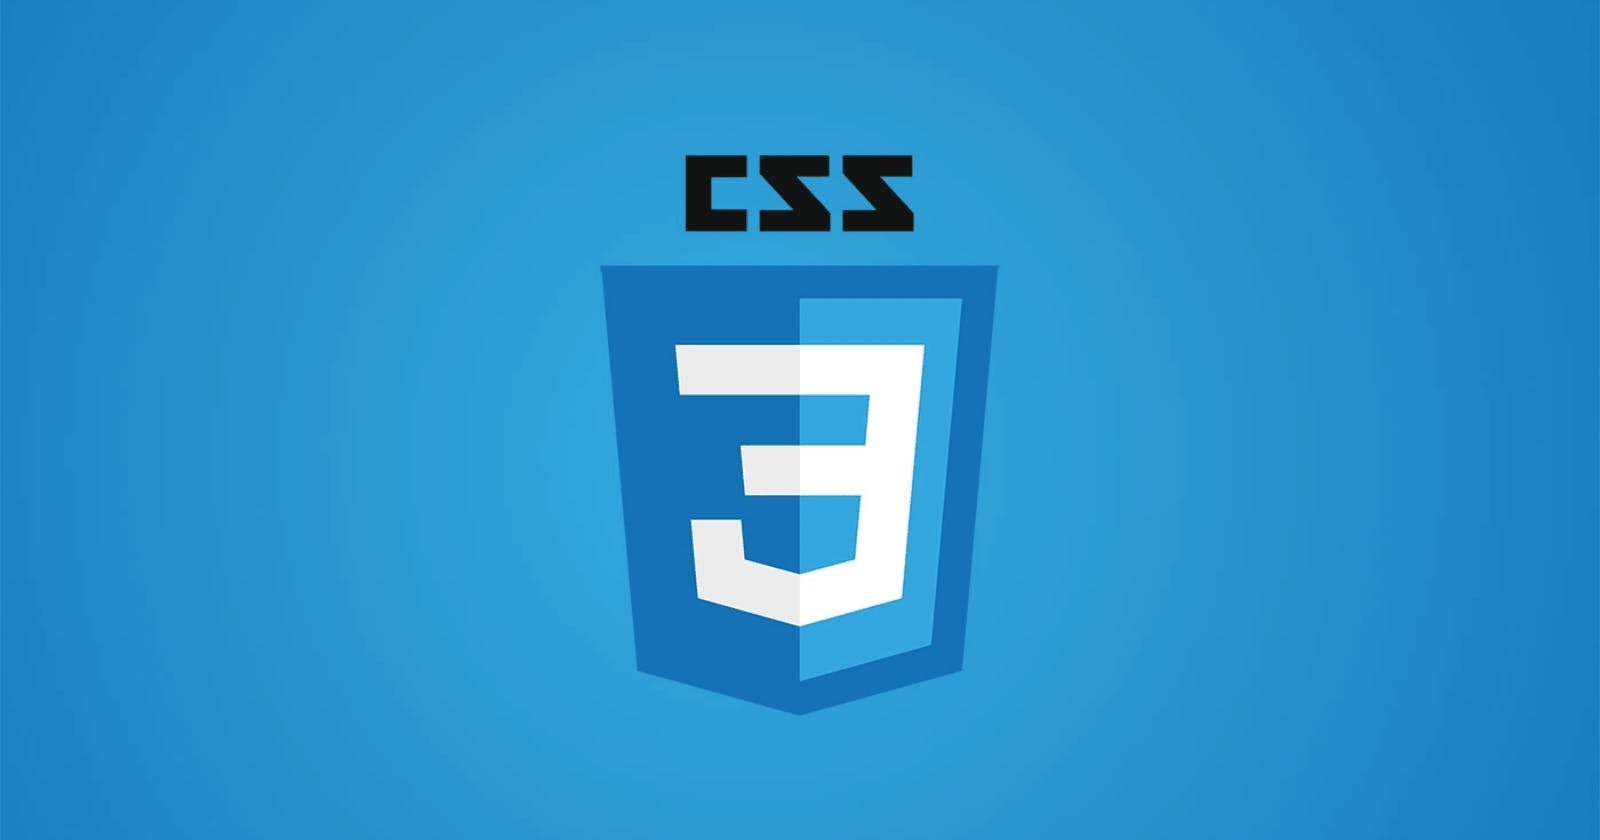 Introduction to CSS Position